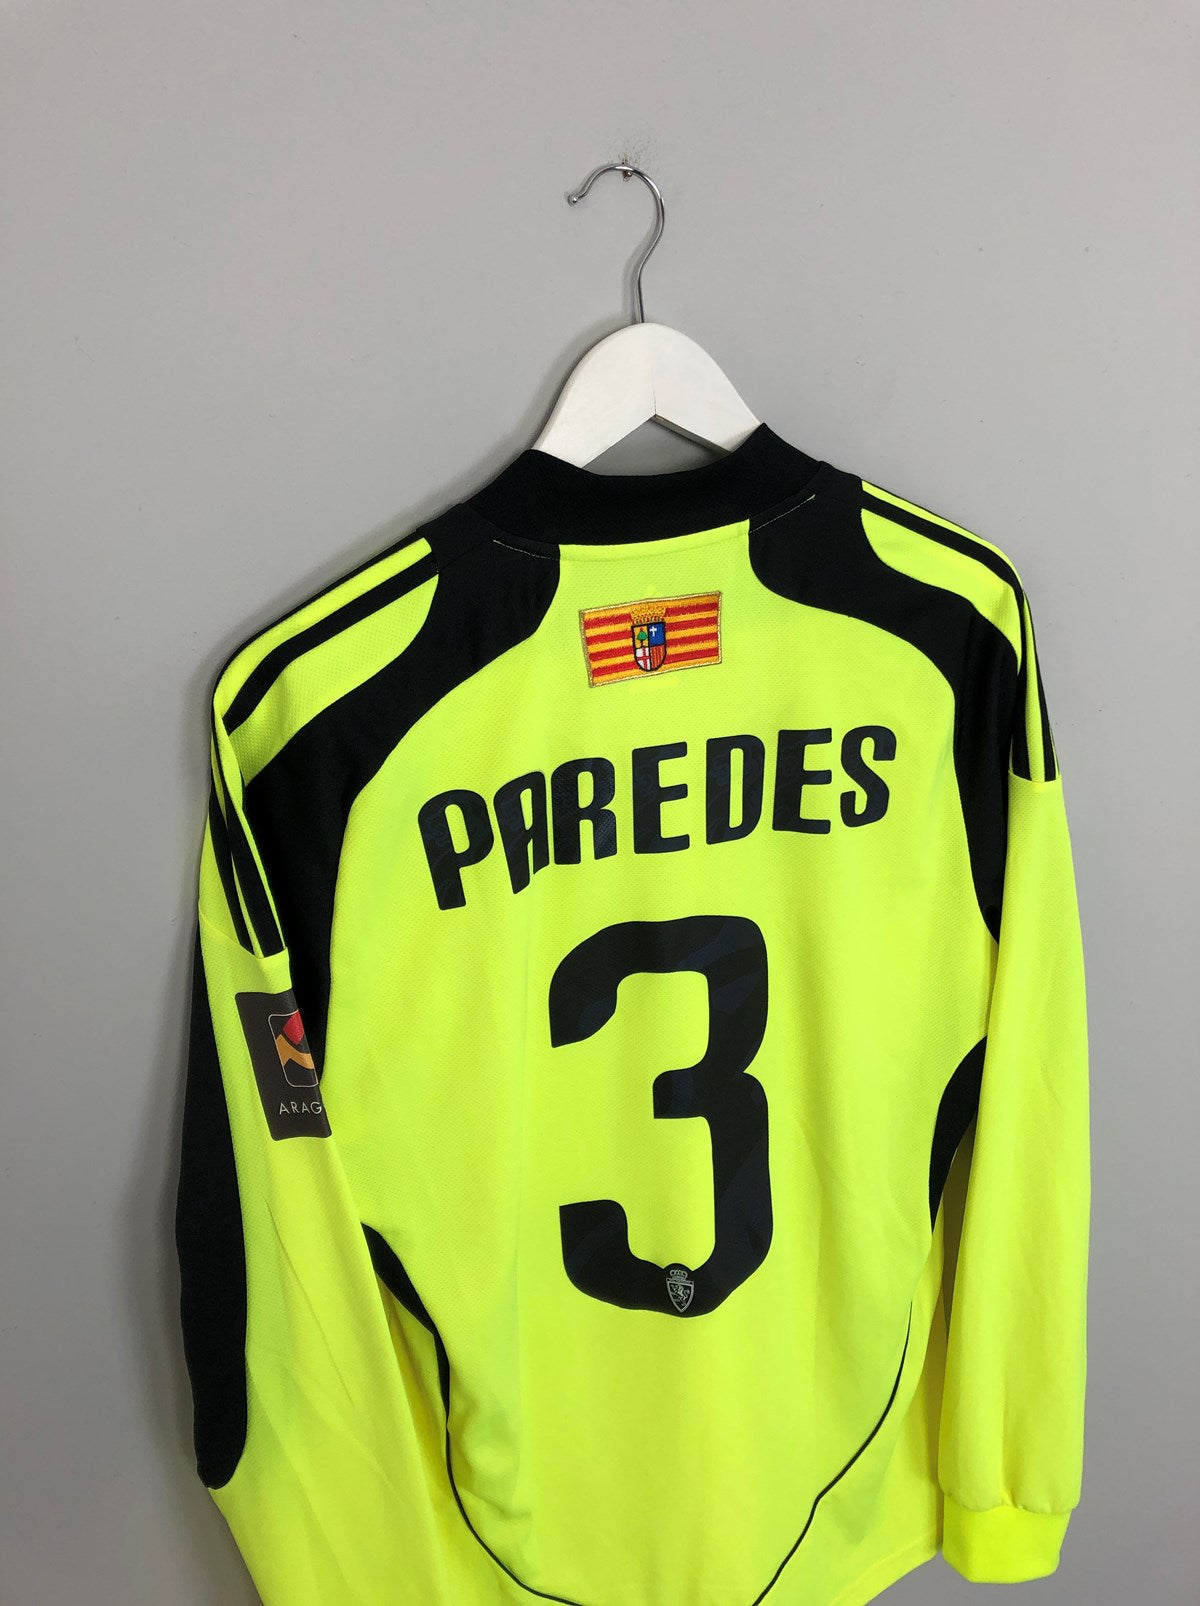 2010/11 REAL ZARAGOZA PAREDES #3 *PLAYER ISSUE* L/S AWAY SHIRT (M) ADIDAS